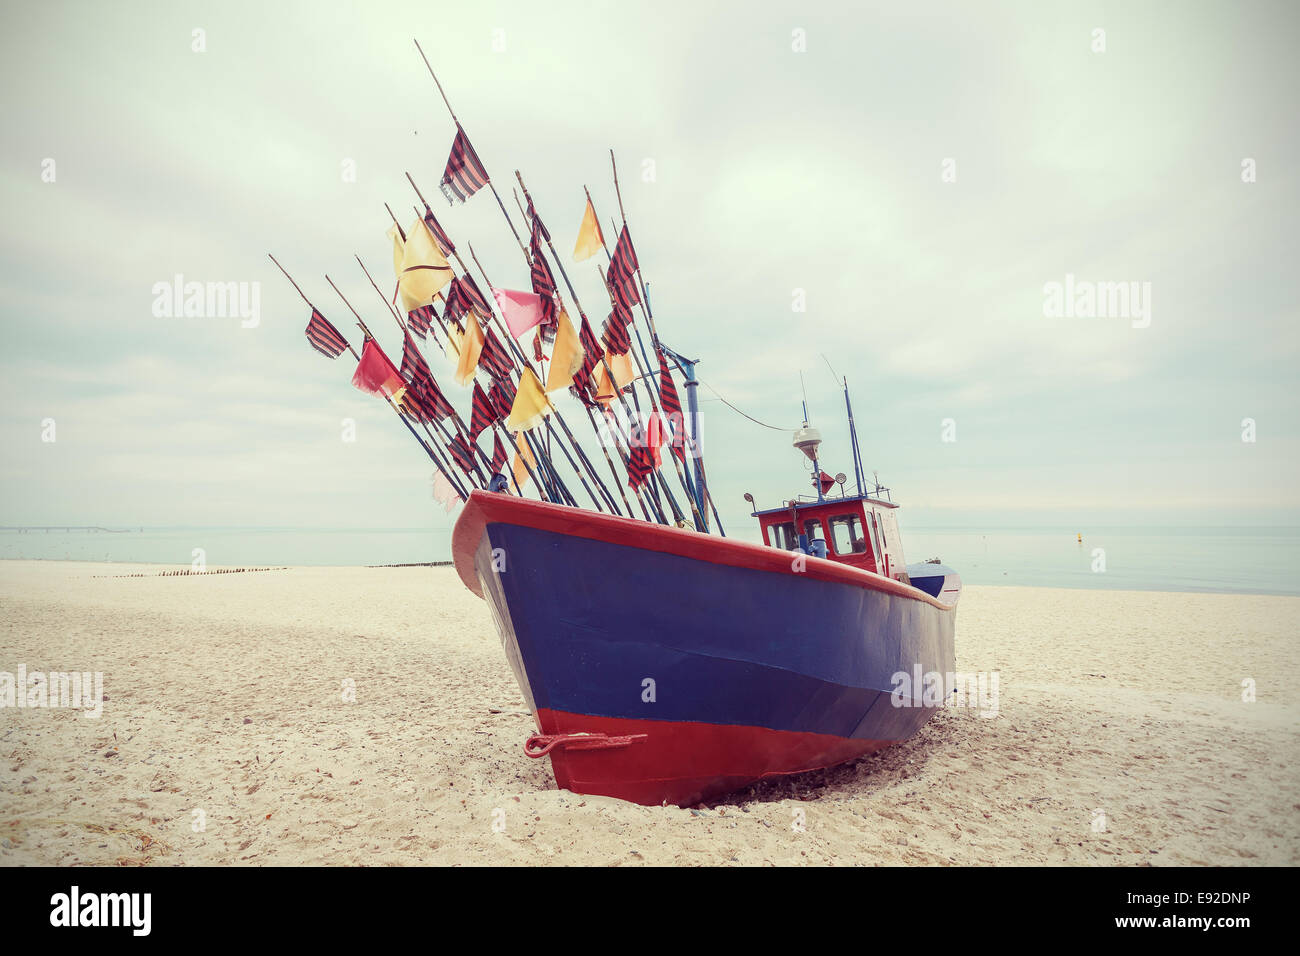 Fishing boat on beach, vintage retro filtered. Stock Photo